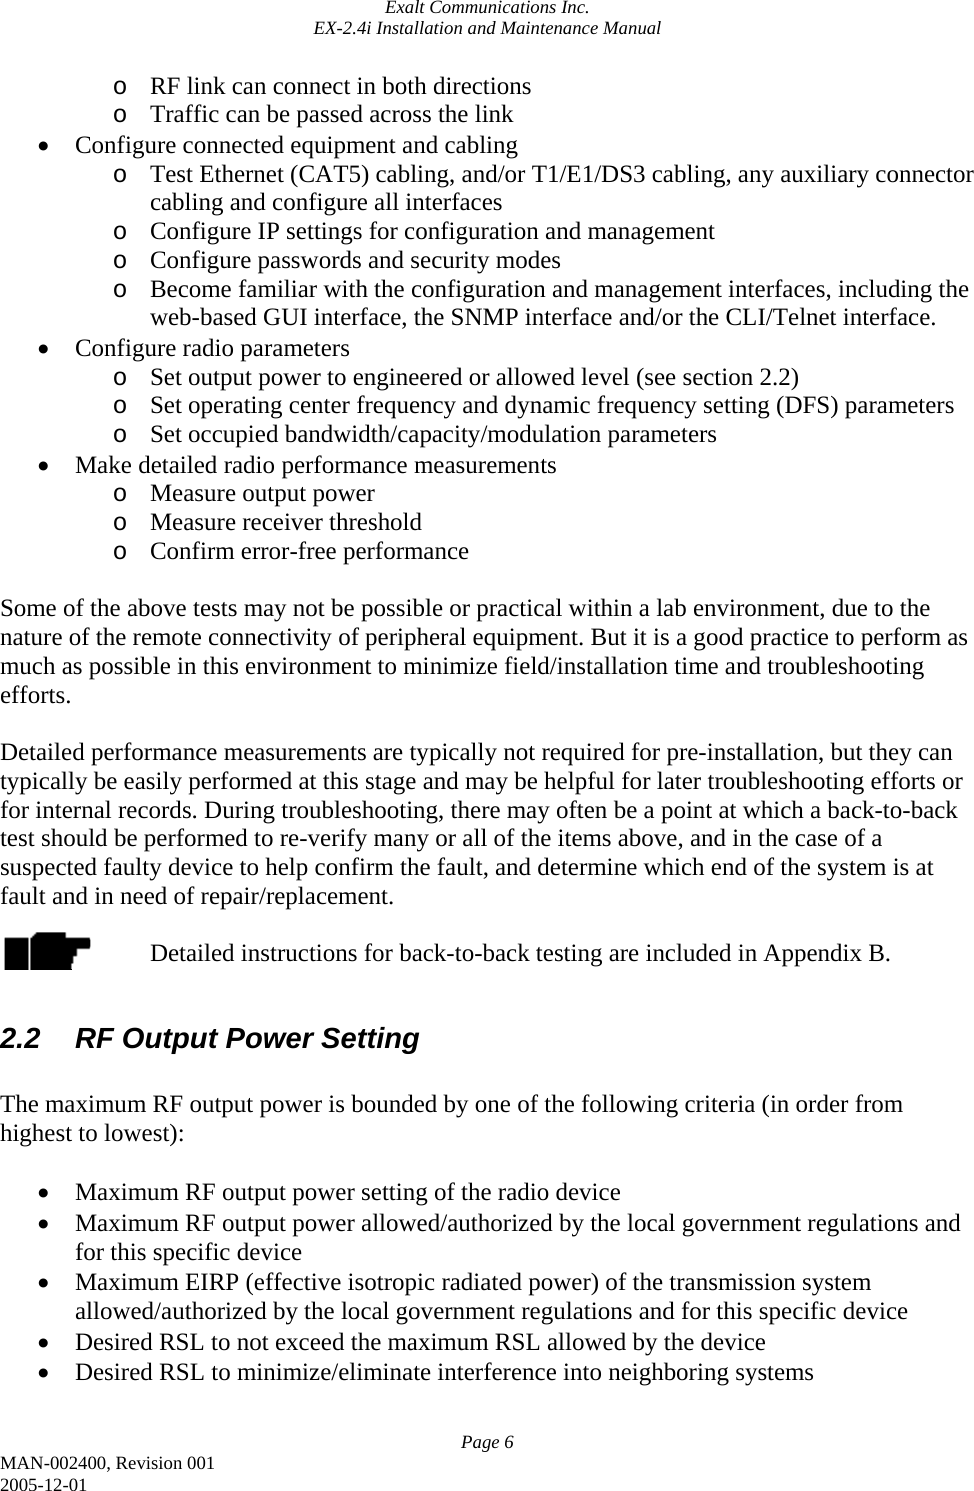 Exalt Communications Inc. EX-2.4i Installation and Maintenance Manual Page 6 MAN-002400, Revision 001 2005-12-01 o RF link can connect in both directions o Traffic can be passed across the link • Configure connected equipment and cabling o Test Ethernet (CAT5) cabling, and/or T1/E1/DS3 cabling, any auxiliary connector cabling and configure all interfaces o Configure IP settings for configuration and management o Configure passwords and security modes o Become familiar with the configuration and management interfaces, including the web-based GUI interface, the SNMP interface and/or the CLI/Telnet interface. • Configure radio parameters o Set output power to engineered or allowed level (see section 2.2) o Set operating center frequency and dynamic frequency setting (DFS) parameters o Set occupied bandwidth/capacity/modulation parameters • Make detailed radio performance measurements o Measure output power o Measure receiver threshold o Confirm error-free performance  Some of the above tests may not be possible or practical within a lab environment, due to the nature of the remote connectivity of peripheral equipment. But it is a good practice to perform as much as possible in this environment to minimize field/installation time and troubleshooting efforts.  Detailed performance measurements are typically not required for pre-installation, but they can typically be easily performed at this stage and may be helpful for later troubleshooting efforts or for internal records. During troubleshooting, there may often be a point at which a back-to-back test should be performed to re-verify many or all of the items above, and in the case of a suspected faulty device to help confirm the fault, and determine which end of the system is at fault and in need of repair/replacement.  Detailed instructions for back-to-back testing are included in Appendix B.  2.2  RF Output Power Setting  The maximum RF output power is bounded by one of the following criteria (in order from highest to lowest):  • Maximum RF output power setting of the radio device • Maximum RF output power allowed/authorized by the local government regulations and for this specific device • Maximum EIRP (effective isotropic radiated power) of the transmission system allowed/authorized by the local government regulations and for this specific device • Desired RSL to not exceed the maximum RSL allowed by the device • Desired RSL to minimize/eliminate interference into neighboring systems  